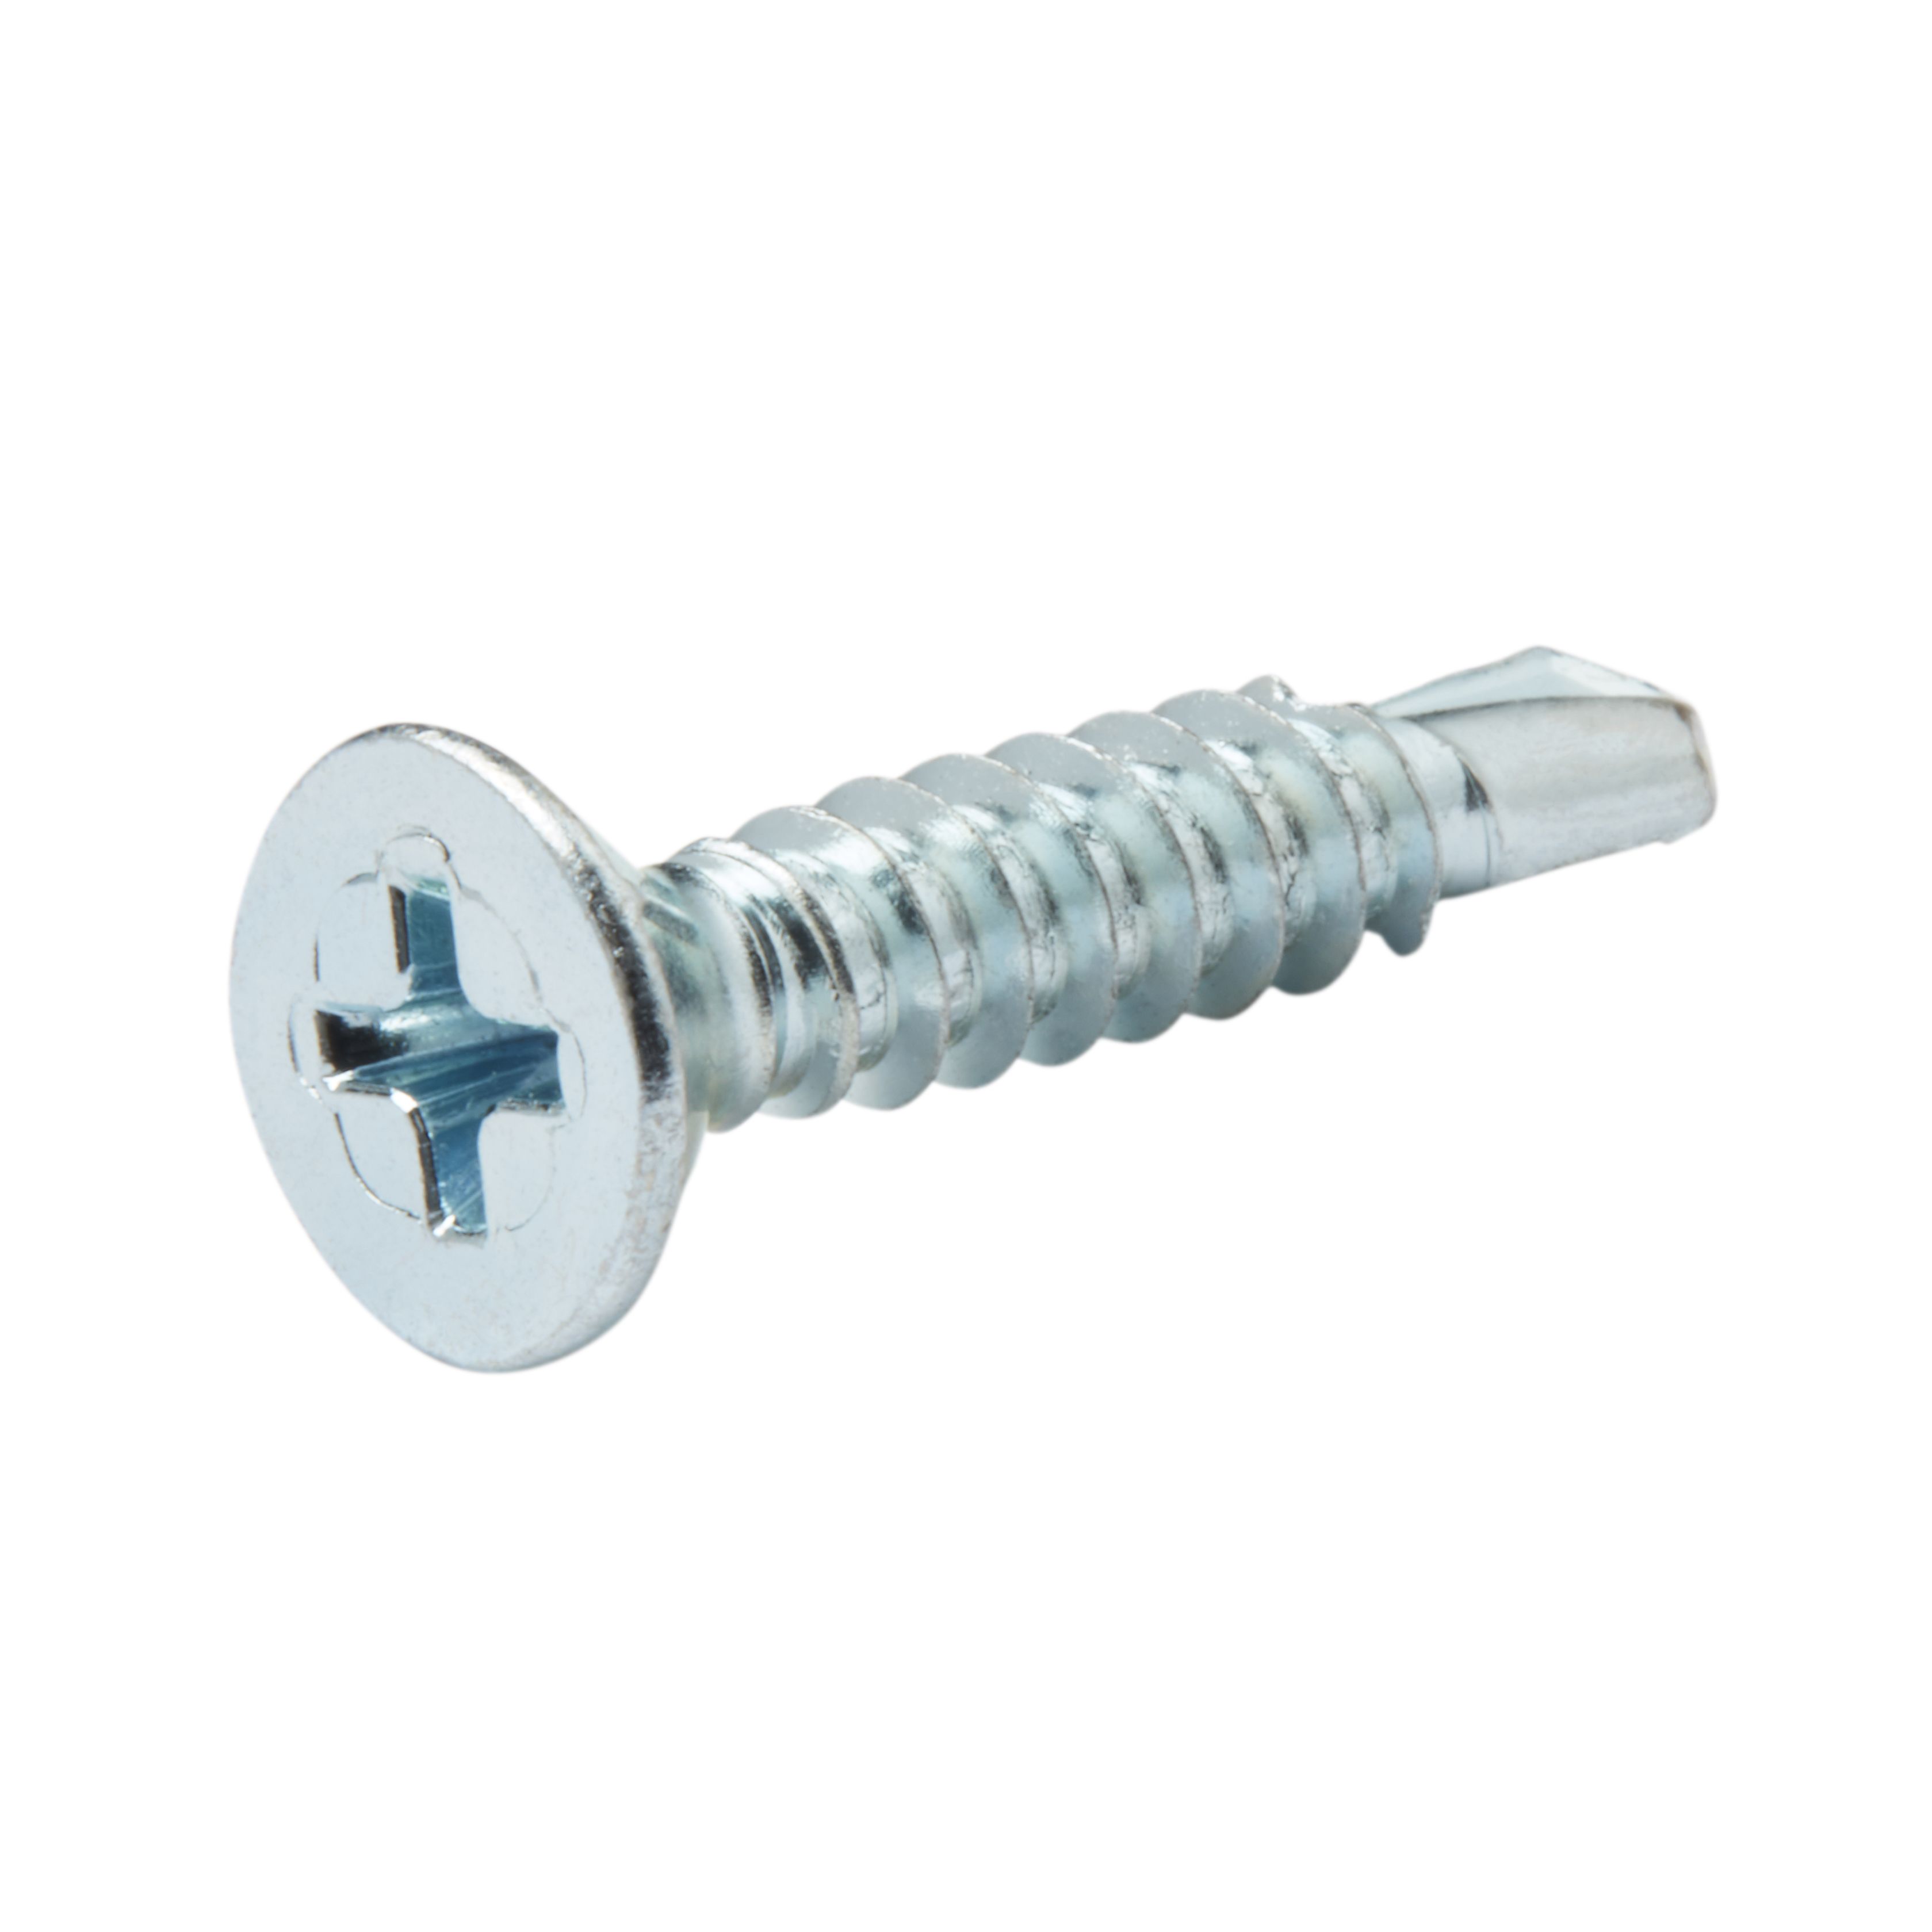 Diall Phillips Countersunk Zinc-plated Carbon steel (C1022) Self-drilling screw (Dia)4.8mm (L)25mm, Pack of 25